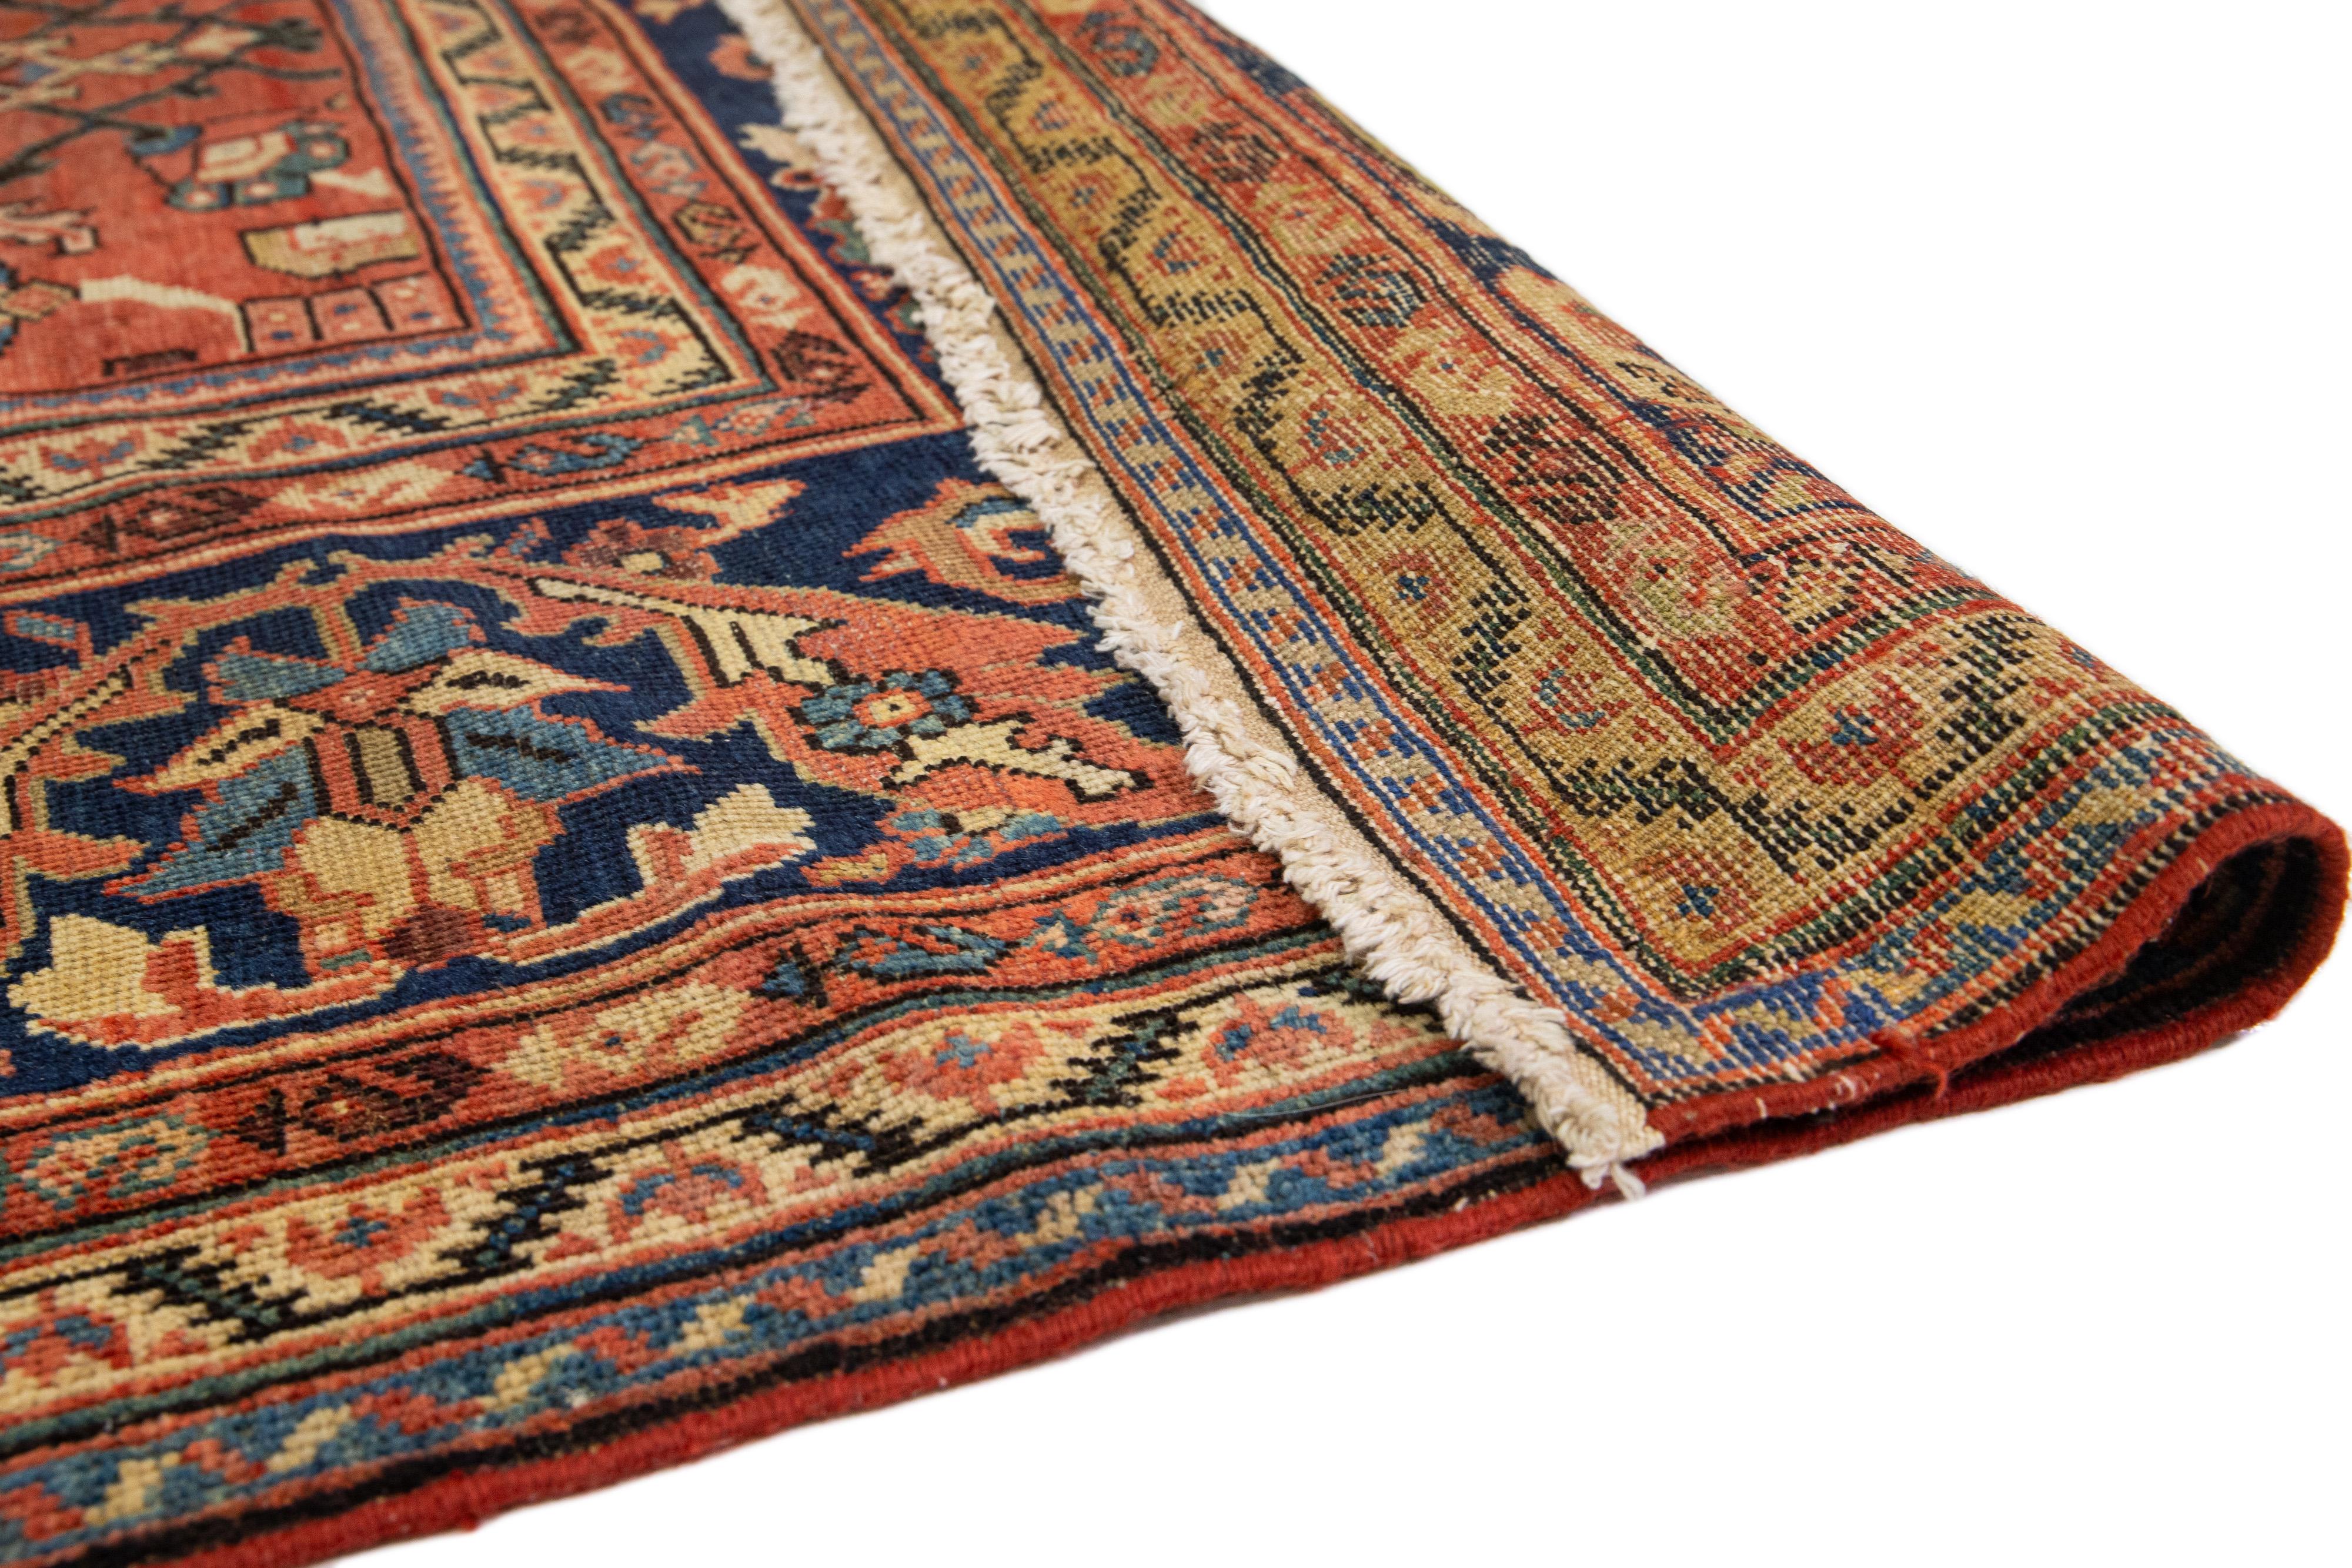 1880s Antique Floral Persian Sultanabad Wool Rug In Red In Excellent Condition For Sale In Norwalk, CT